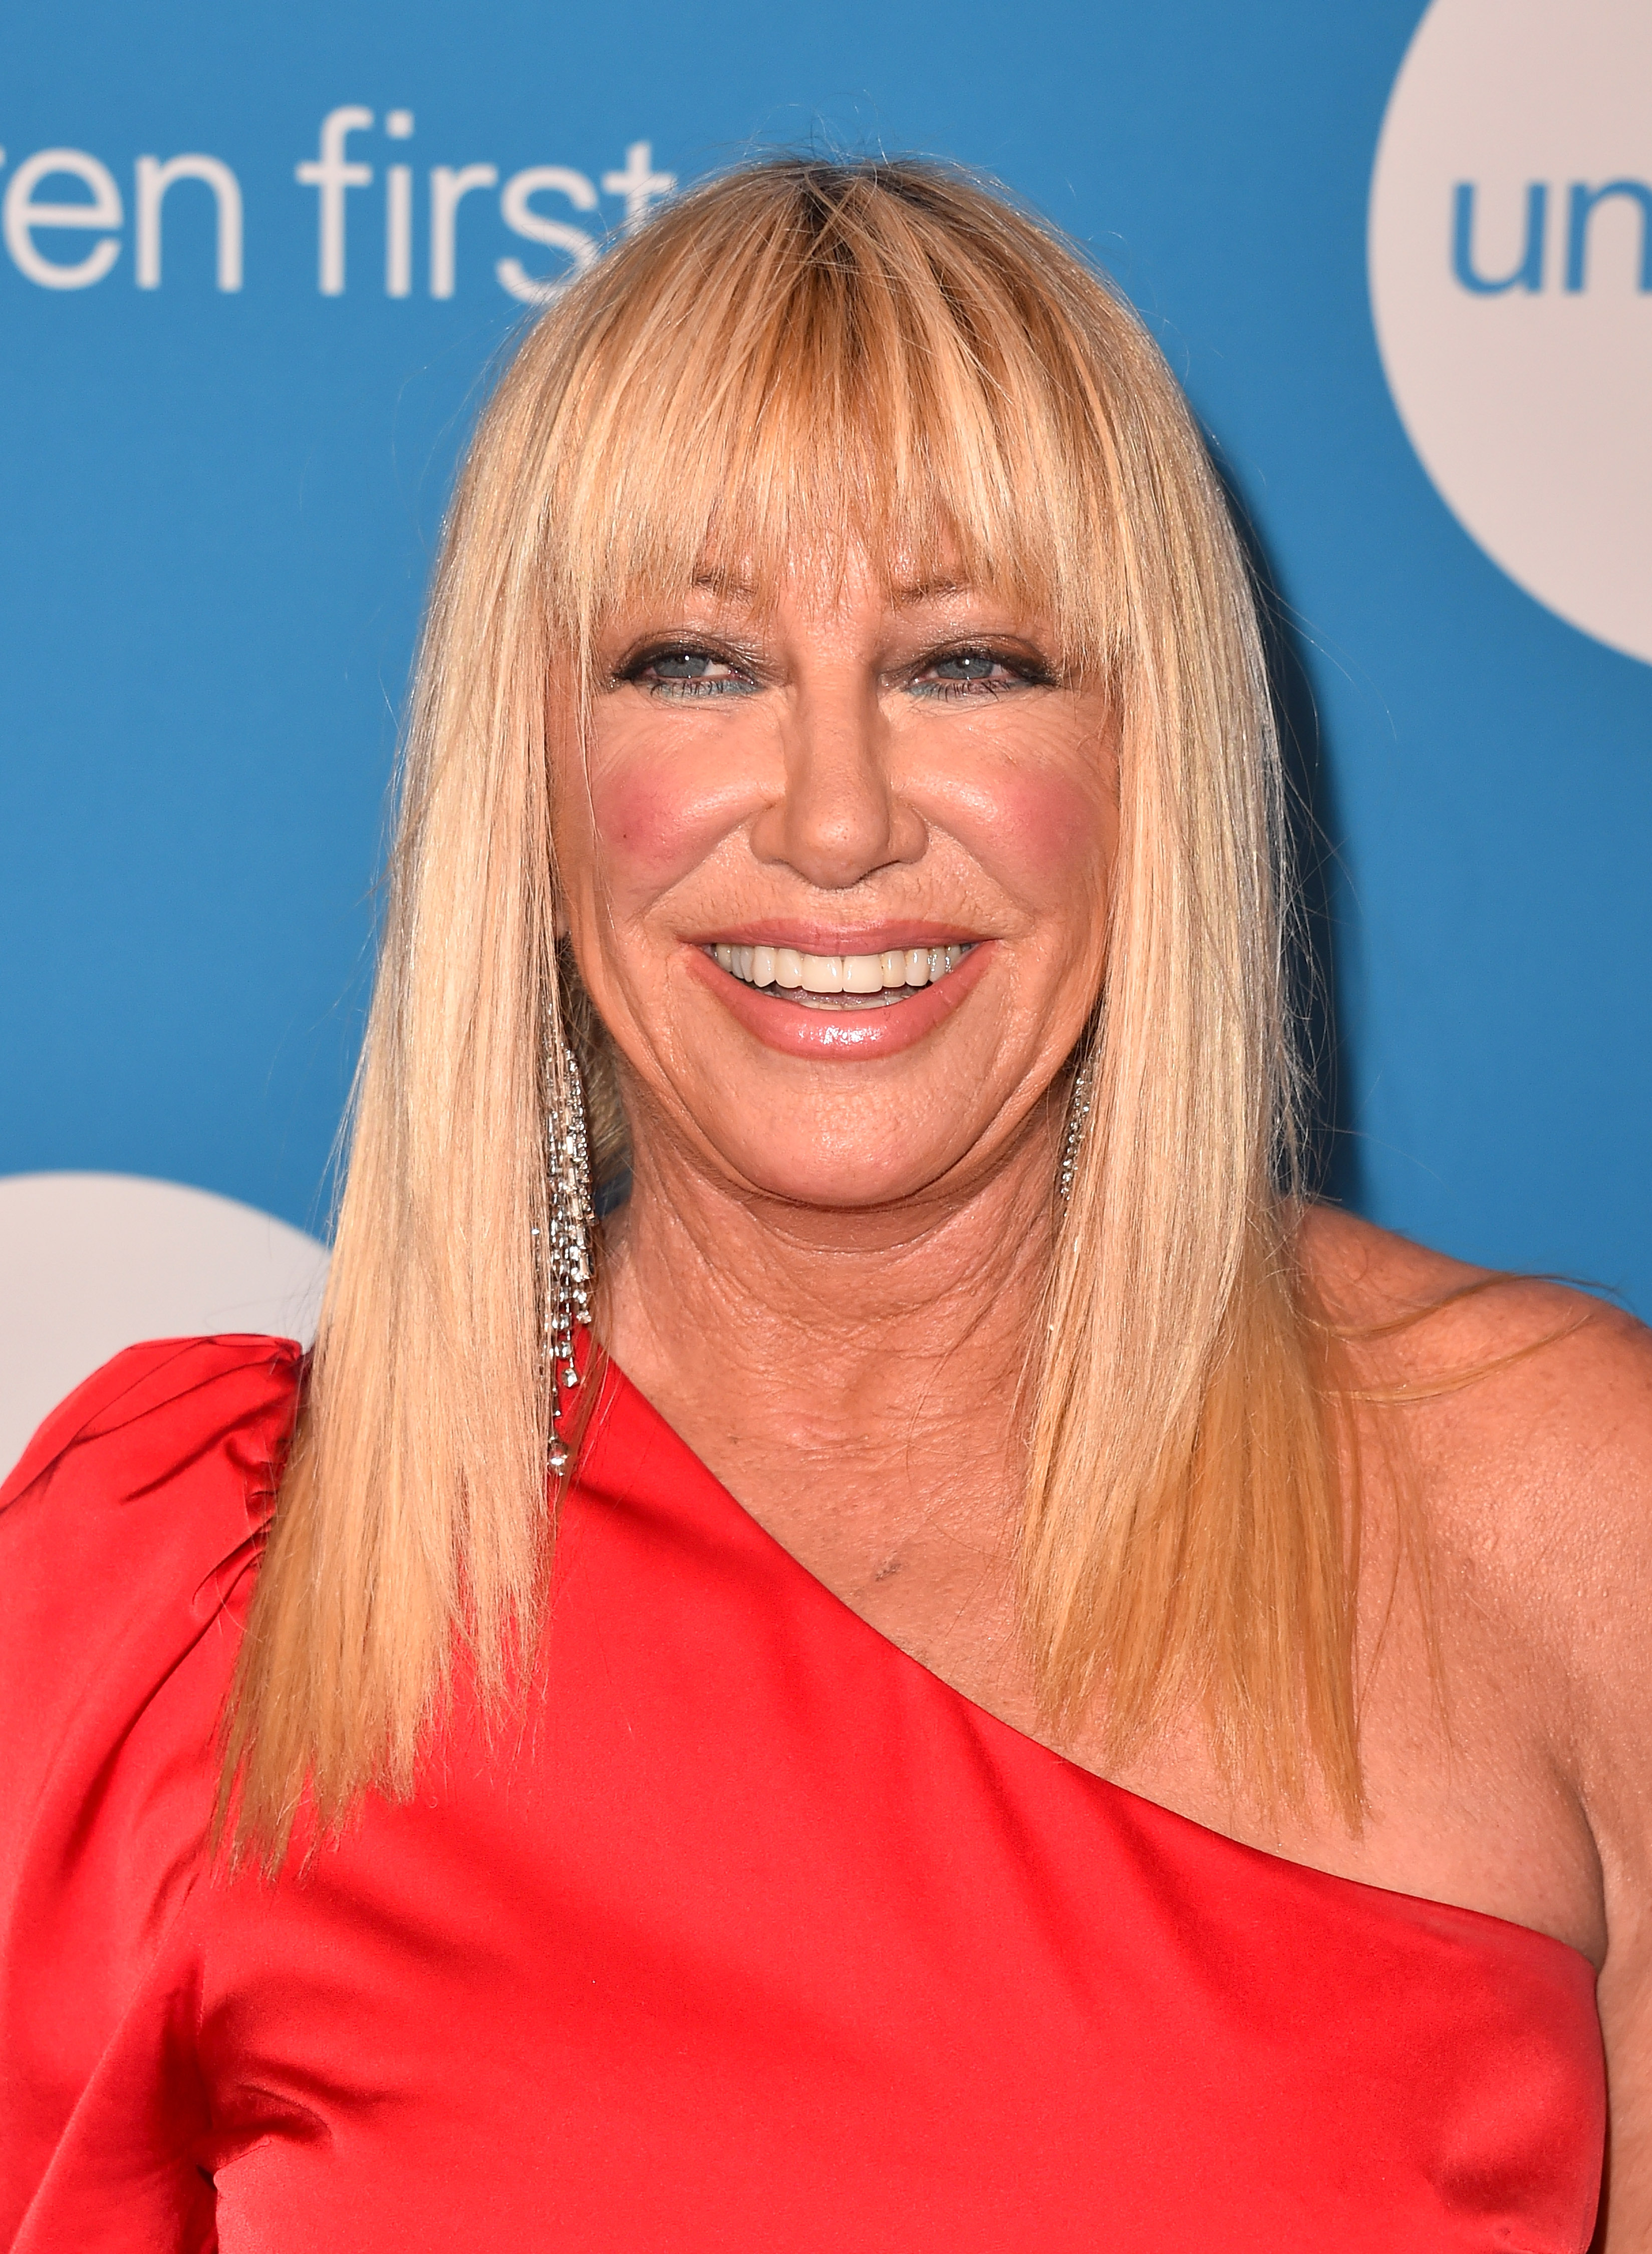 Suzanne Somers at the 7th Biennial UNICEF Ball in Beverly Hills, California on April 14, 2018 | Source: Getty Images